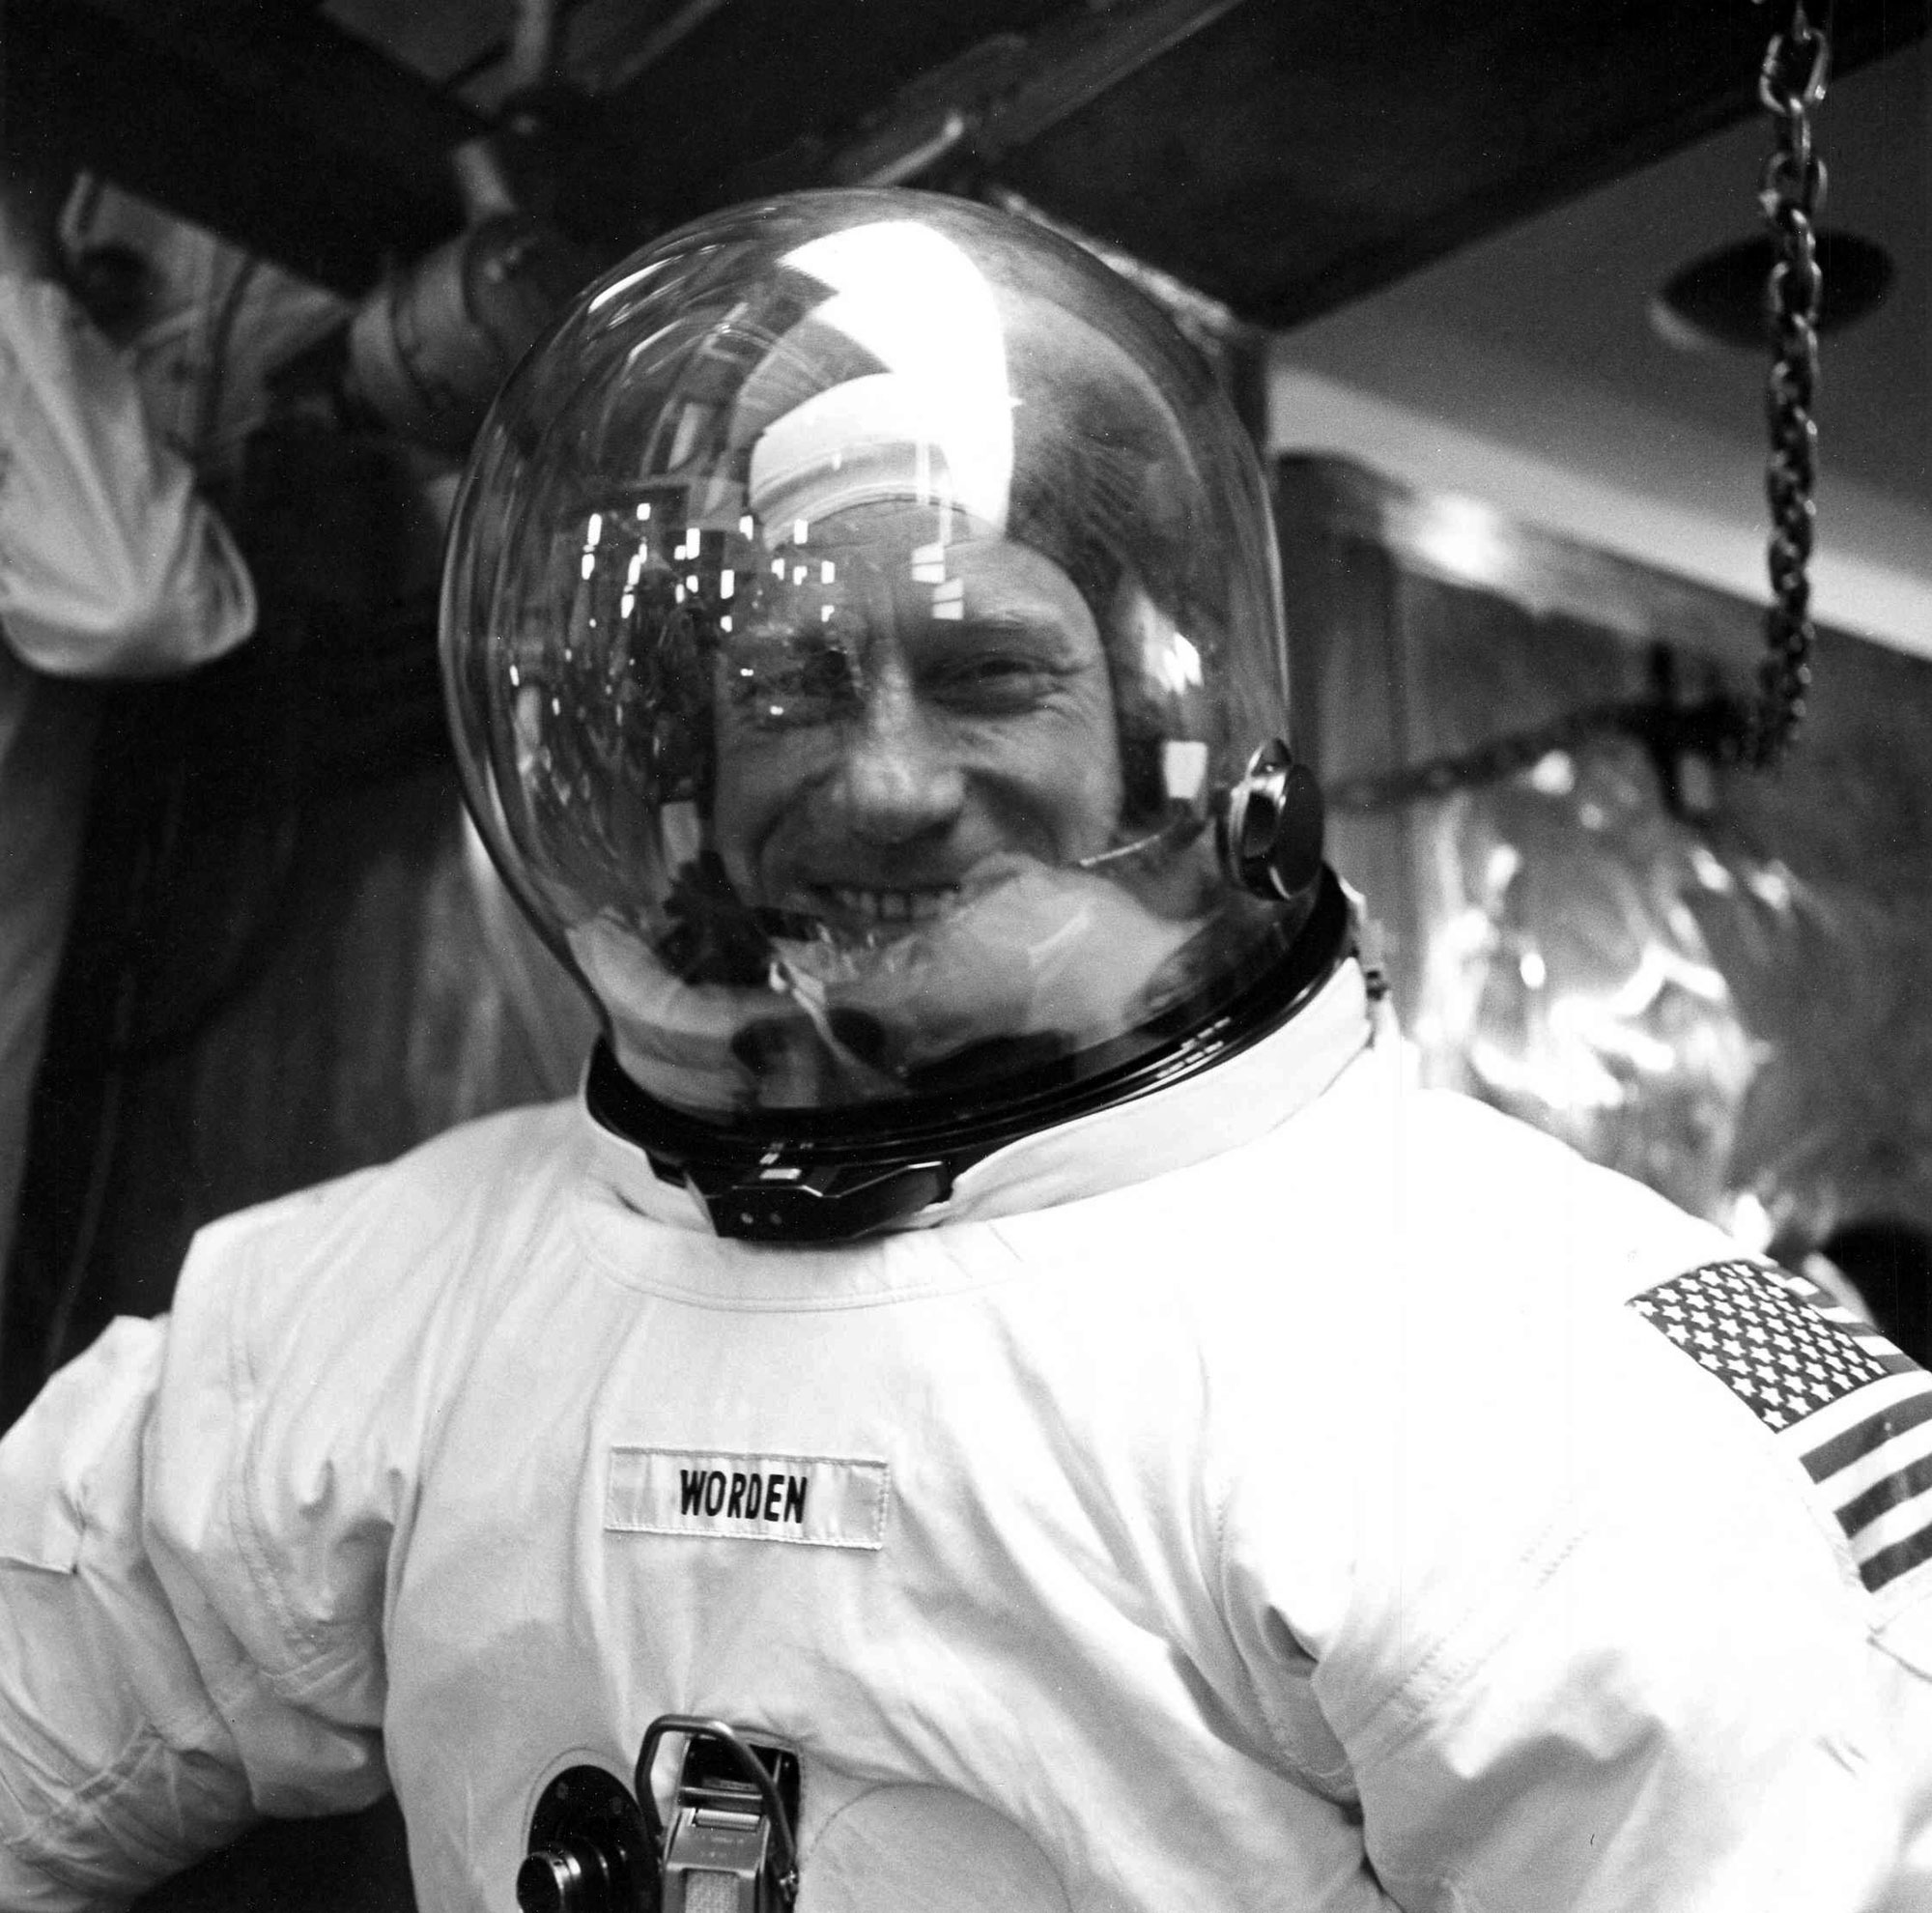 Worden suits up in preparation for a pressure chamber test on April 5, 1971 as part of his training for the Apollo 15 mission. Credit: NASA via Retro Space Images